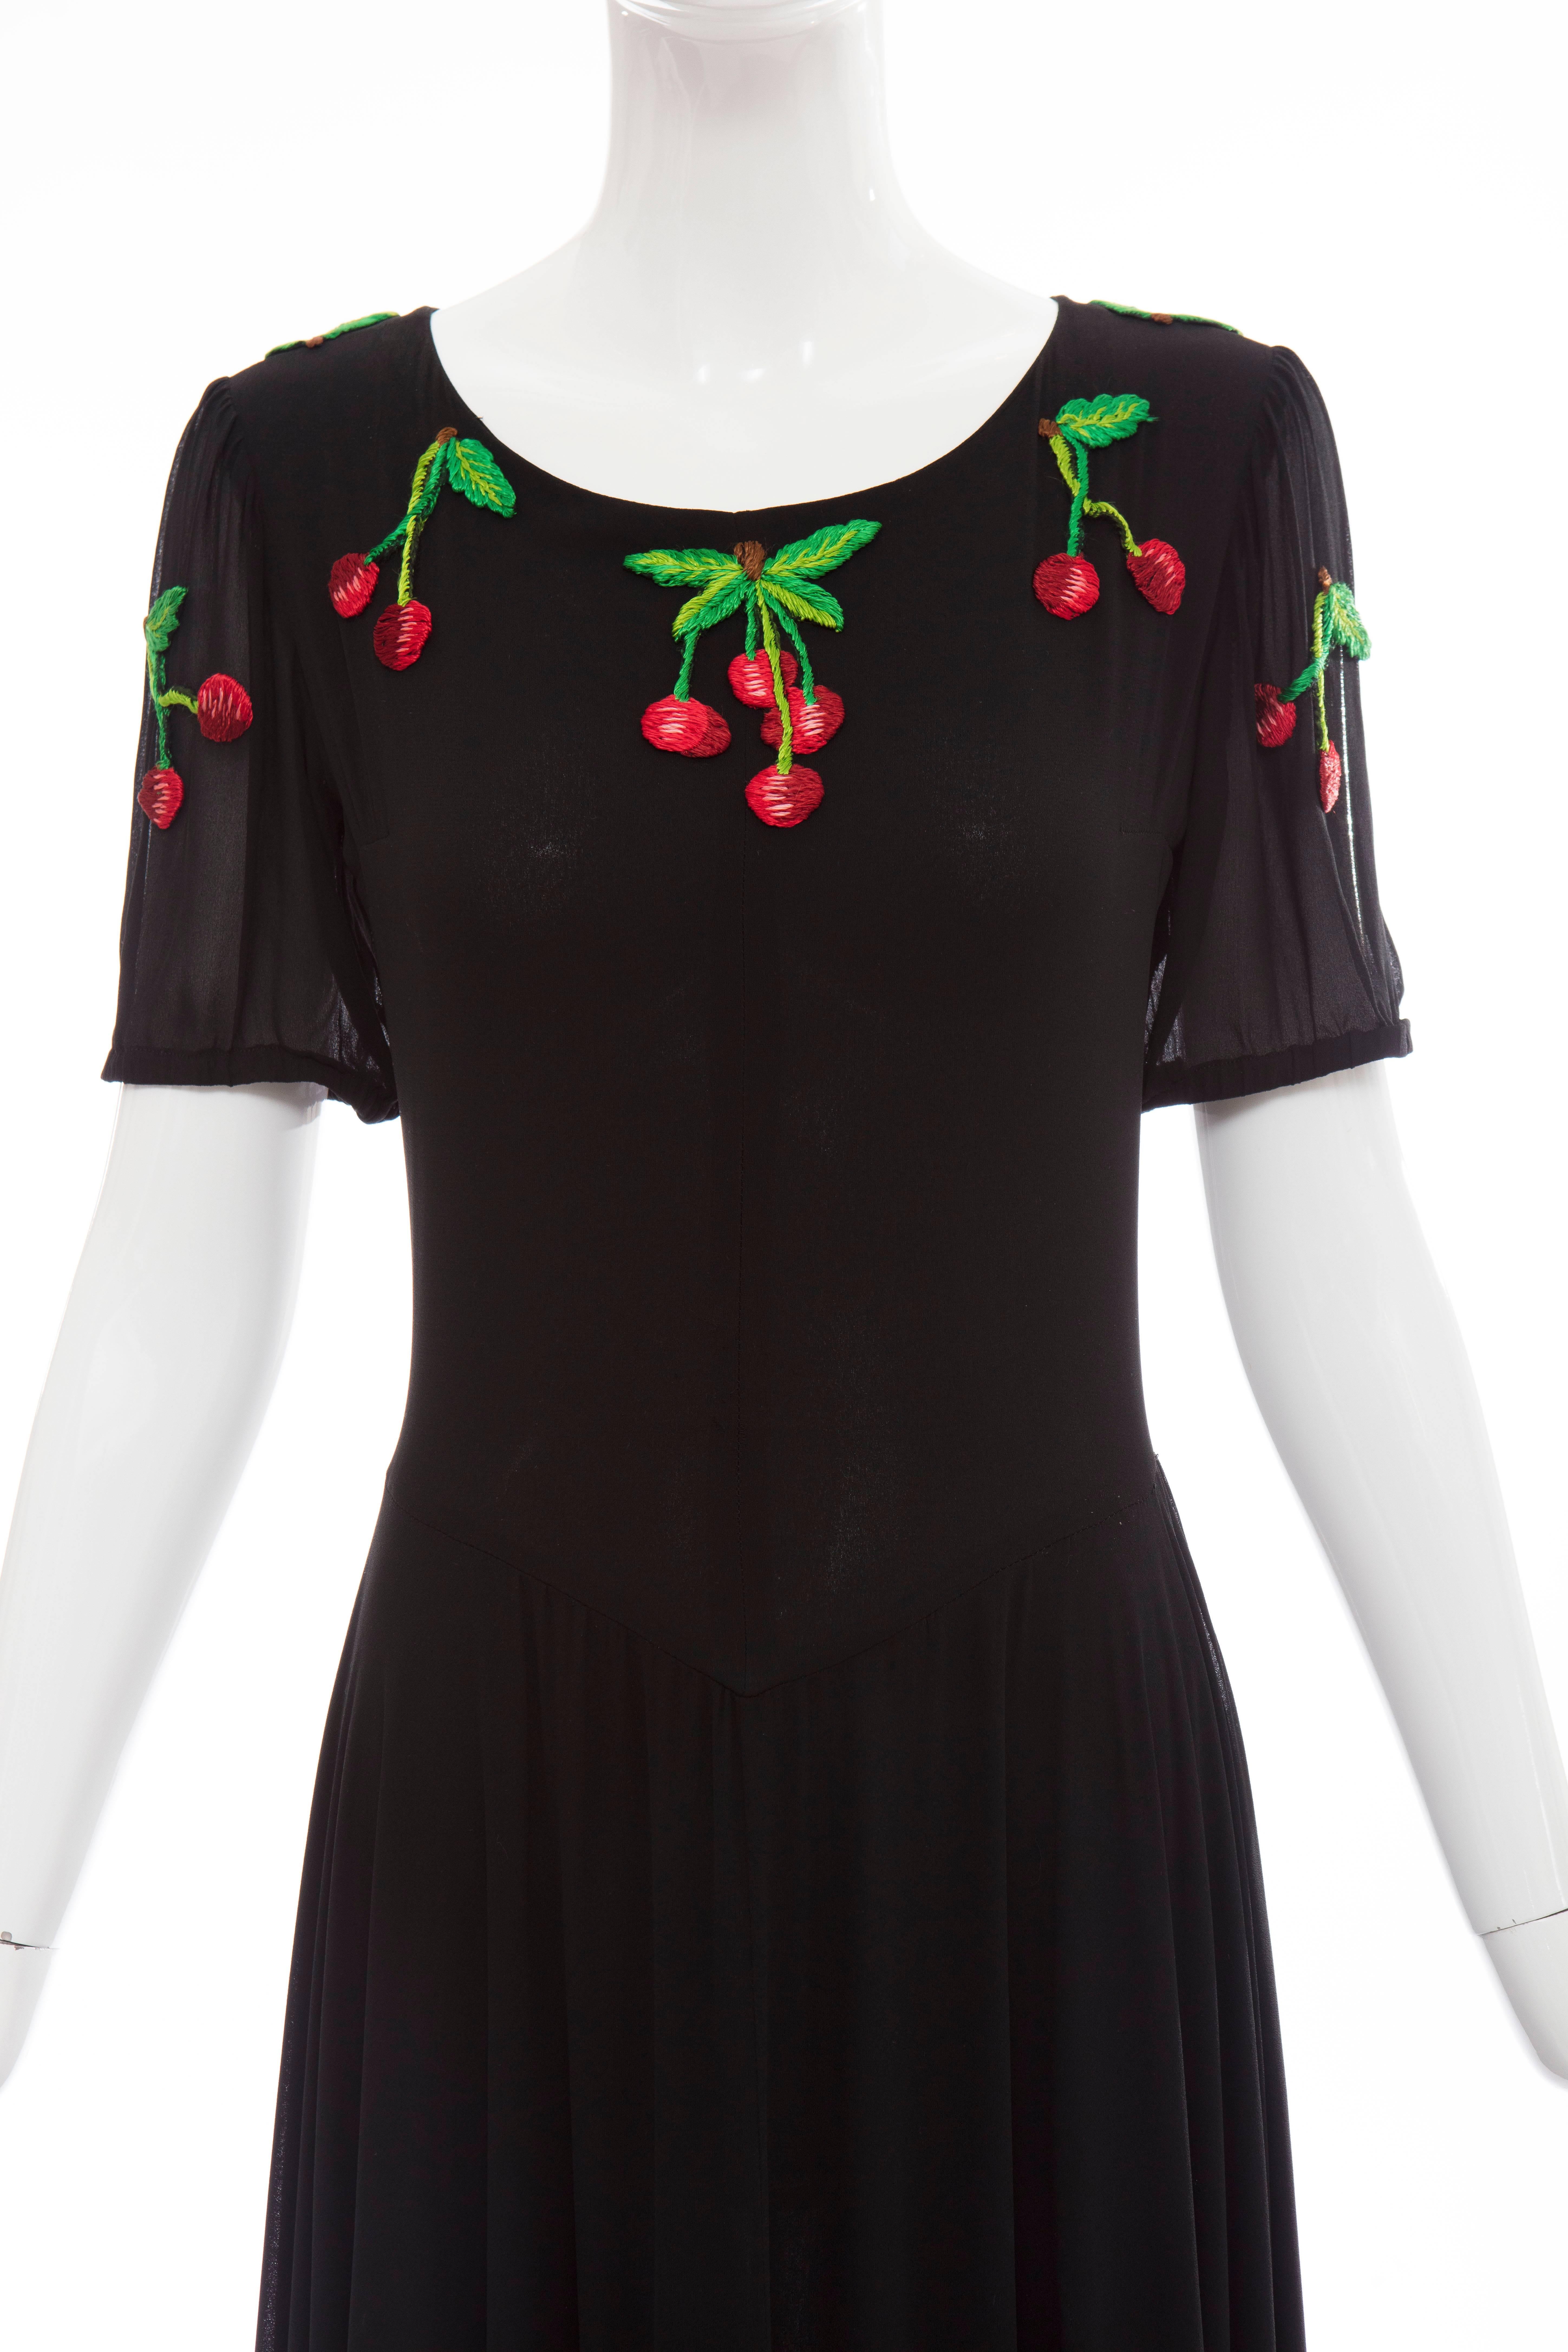 Valentino Black Crepe Evening Dress With Hand Embroidered Cherries, Circa 1970's 1